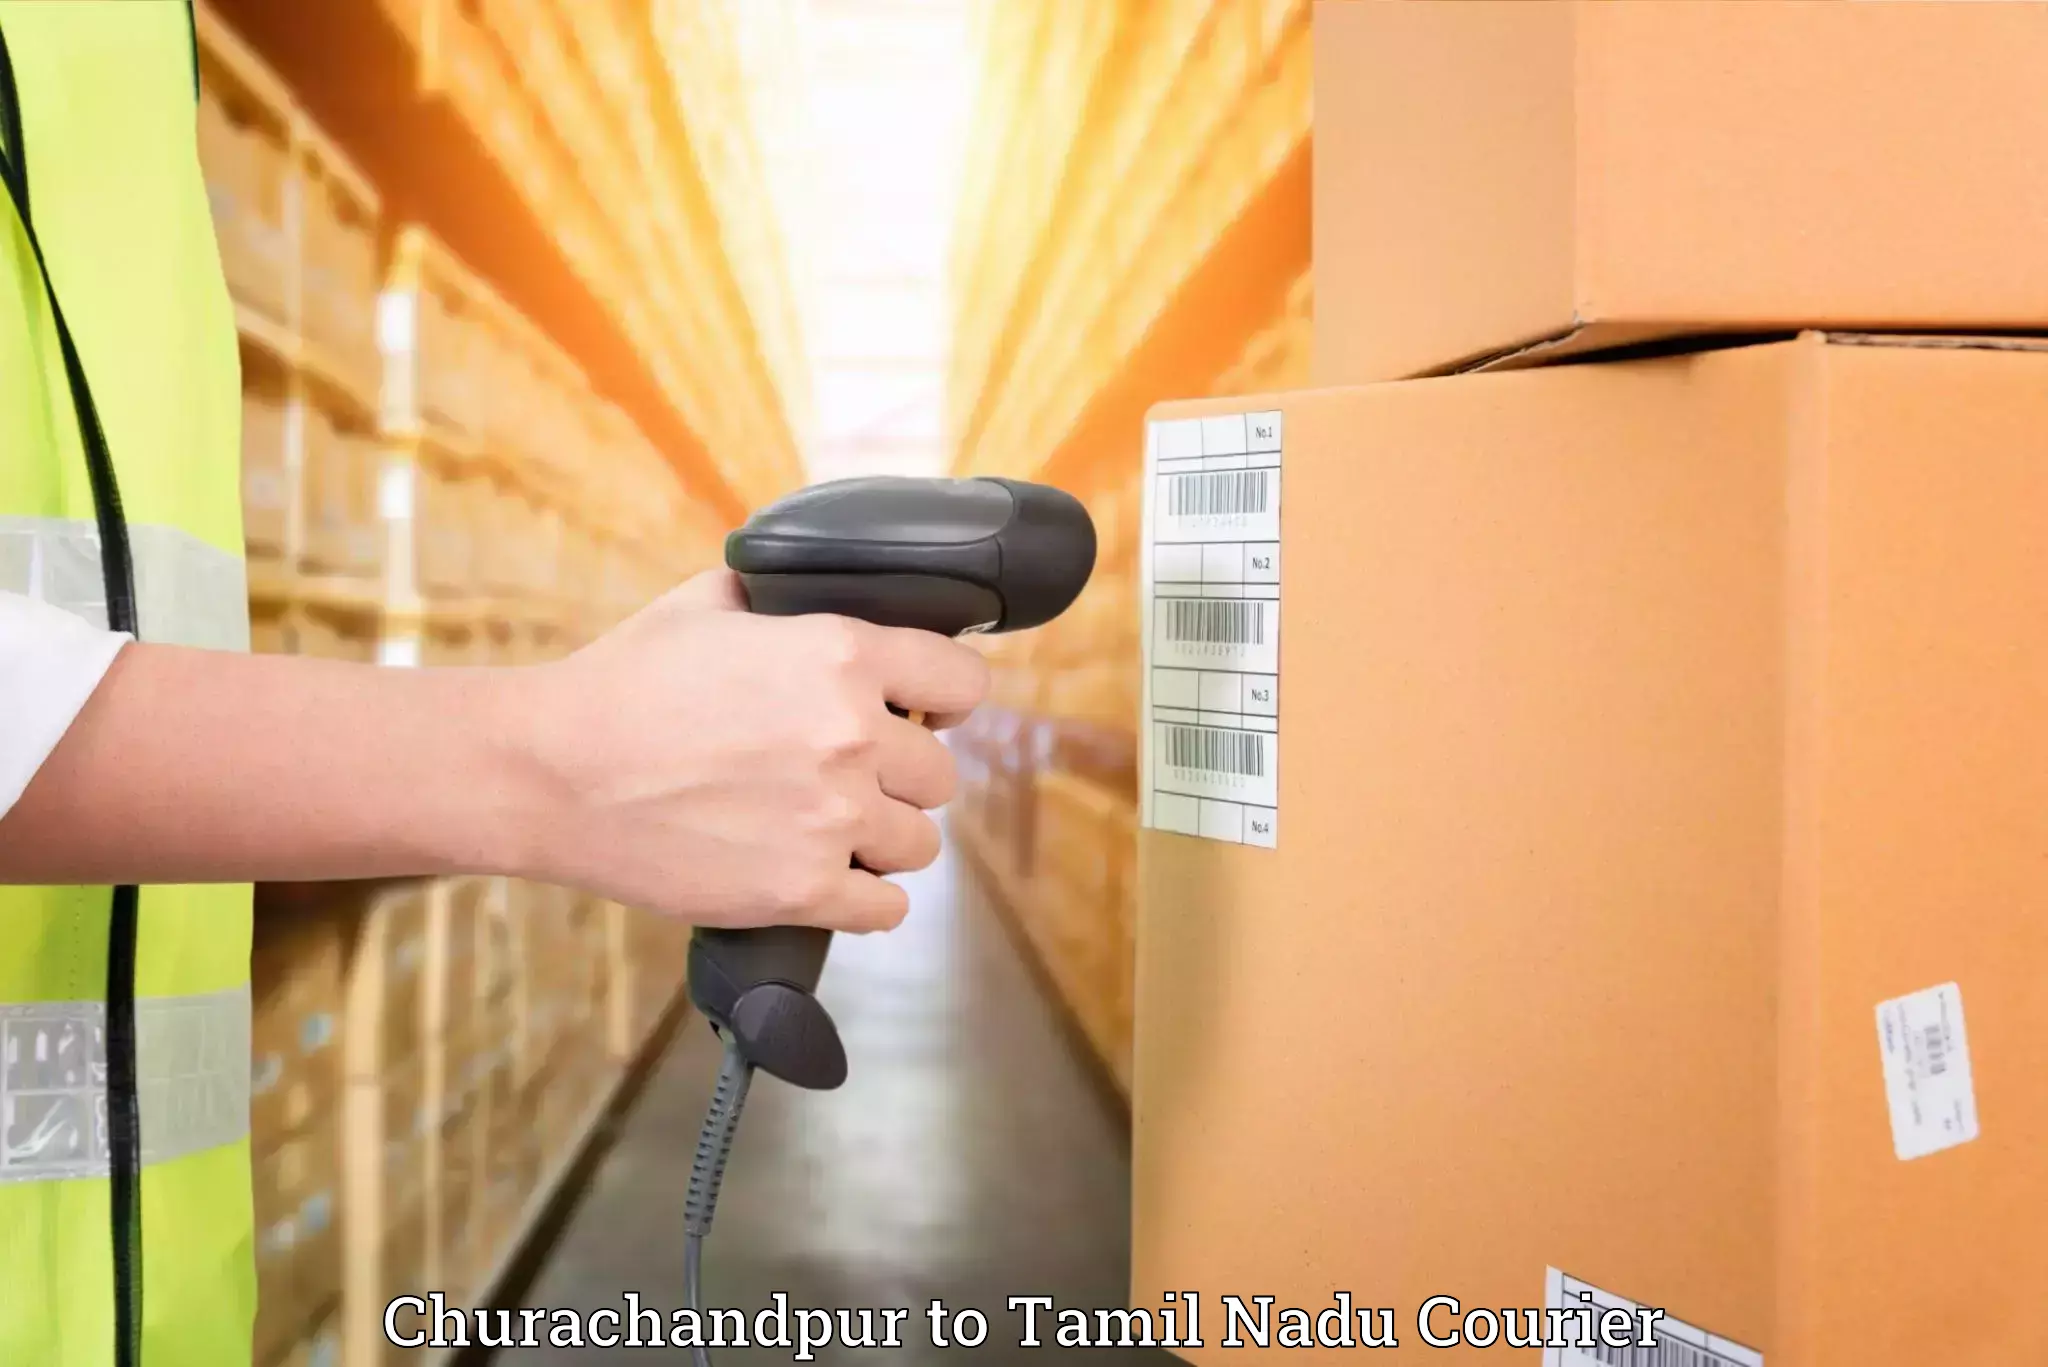 Furniture transport experts Churachandpur to SRM Institute of Science and Technology Chennai